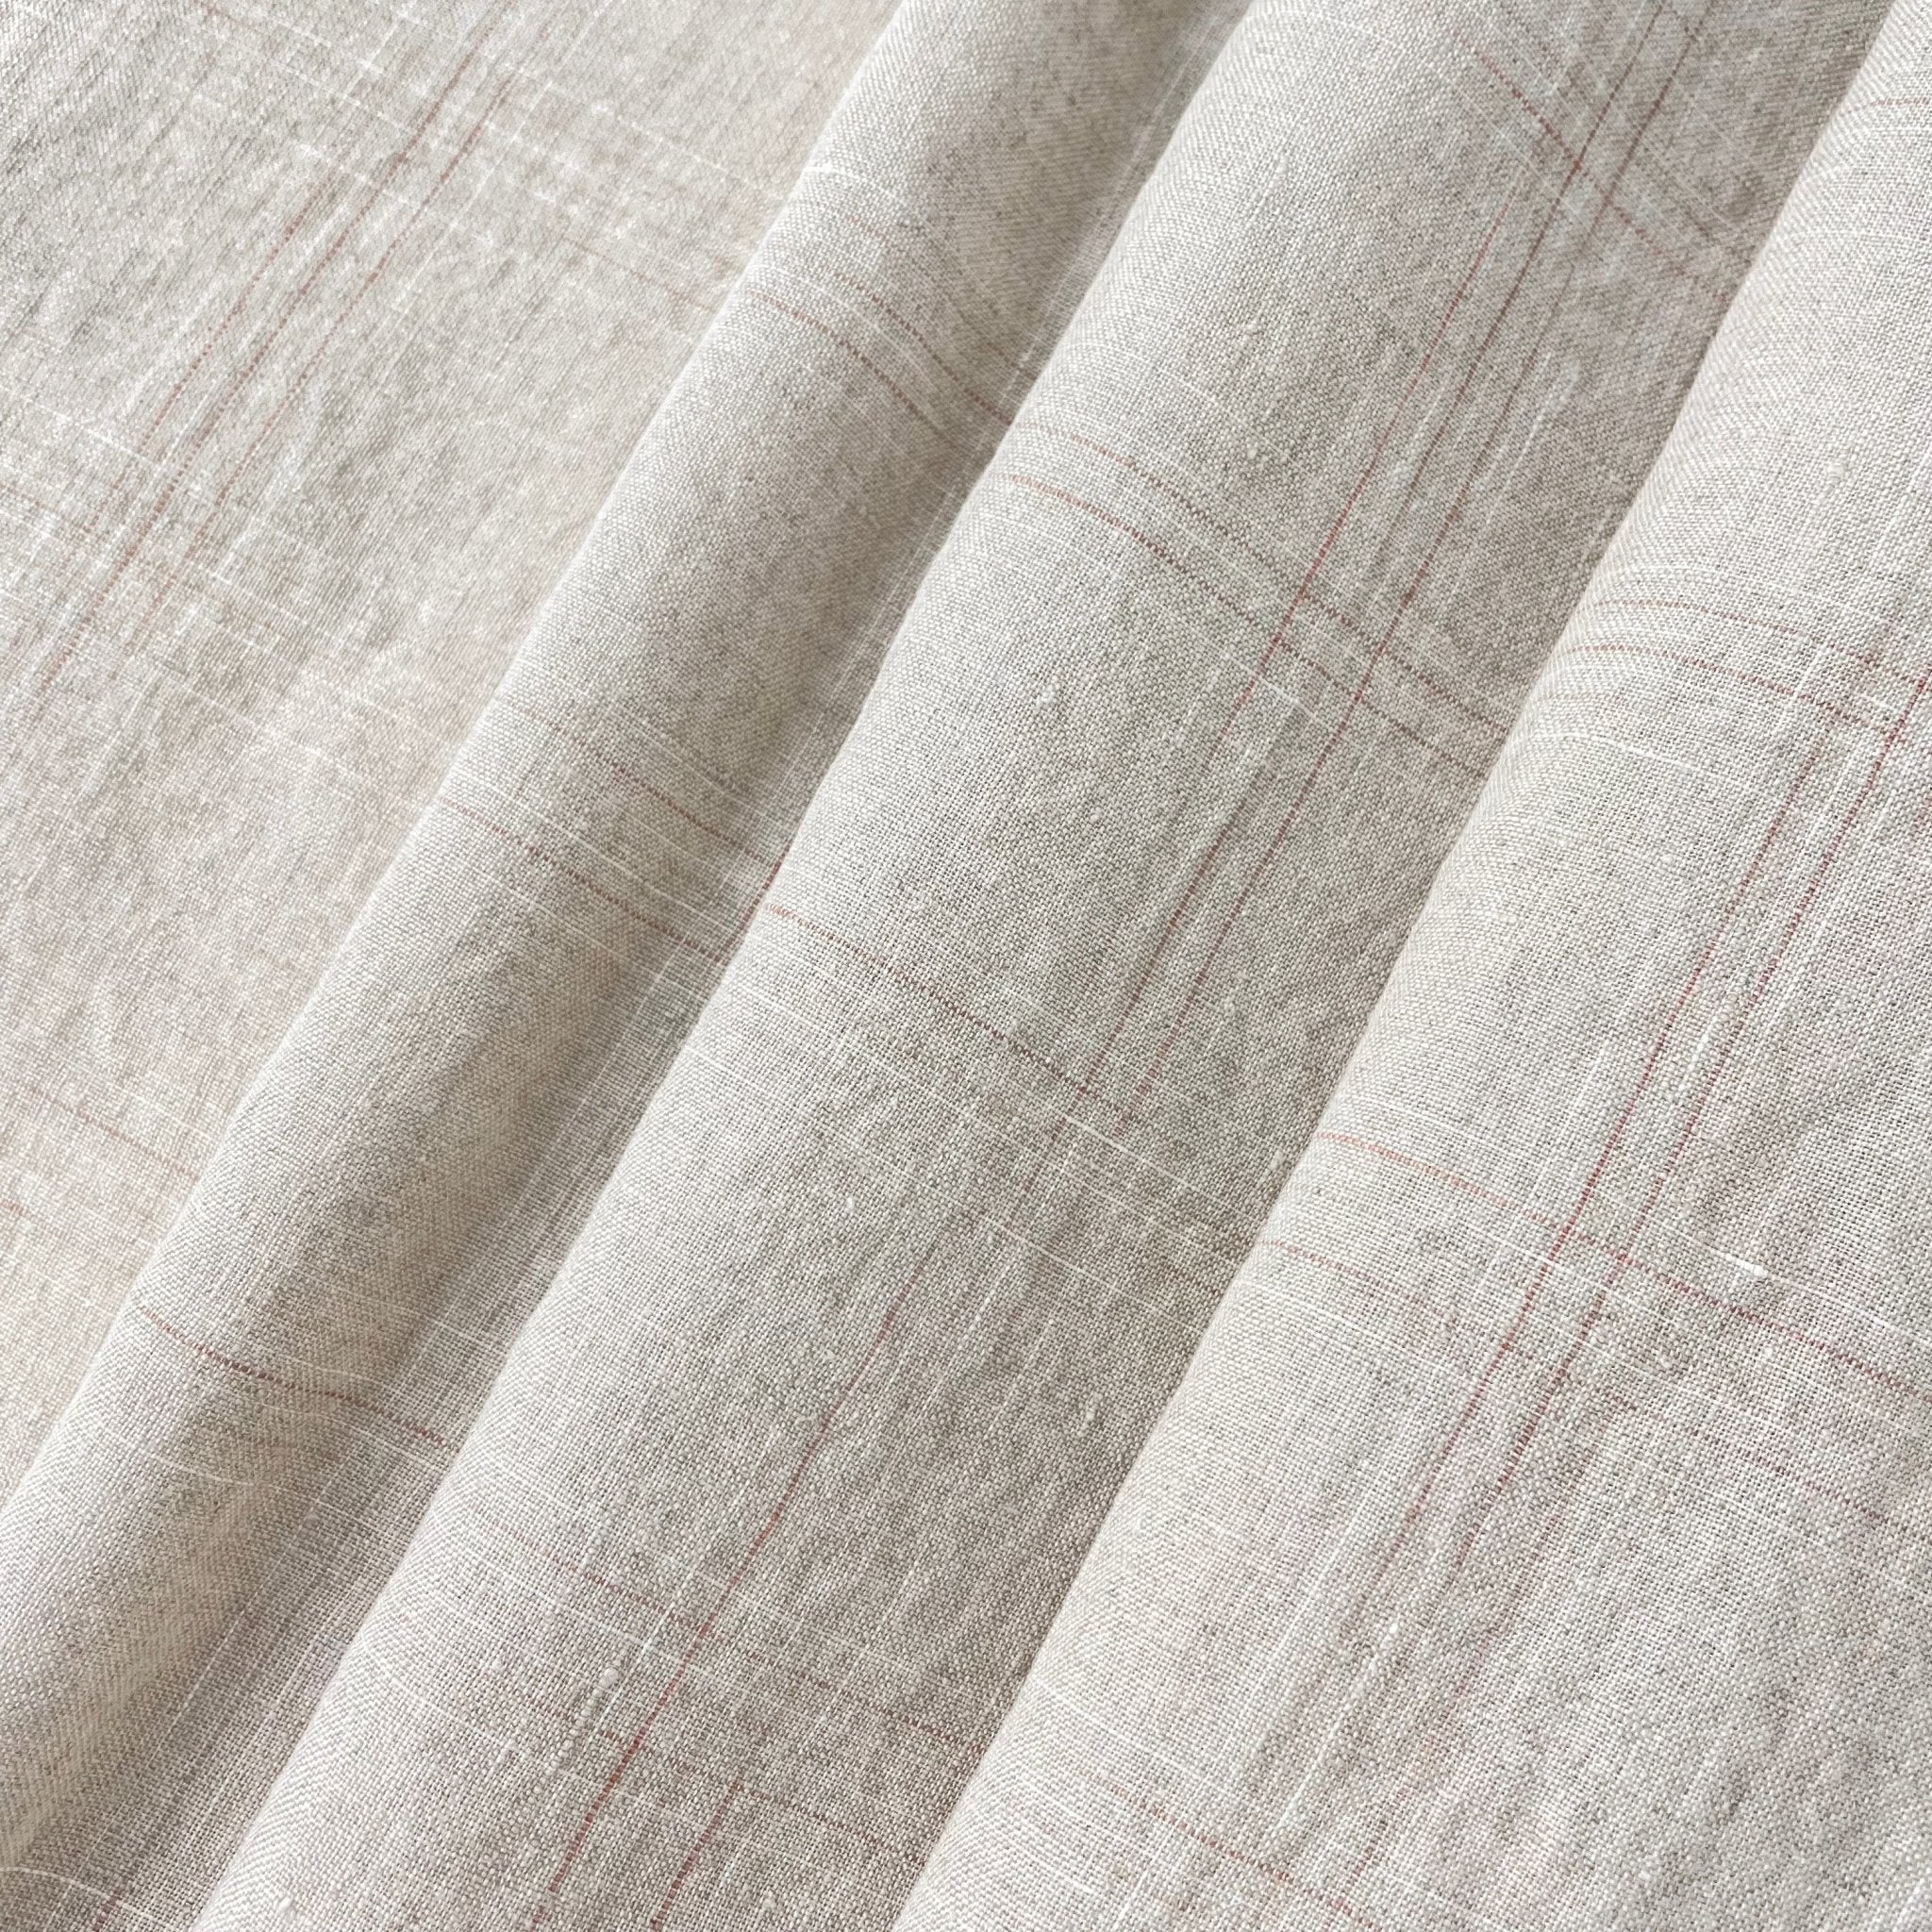 Linen Spaced Dyed Check Fabric 7347 - The Linen Lab - 7347 NATURAL